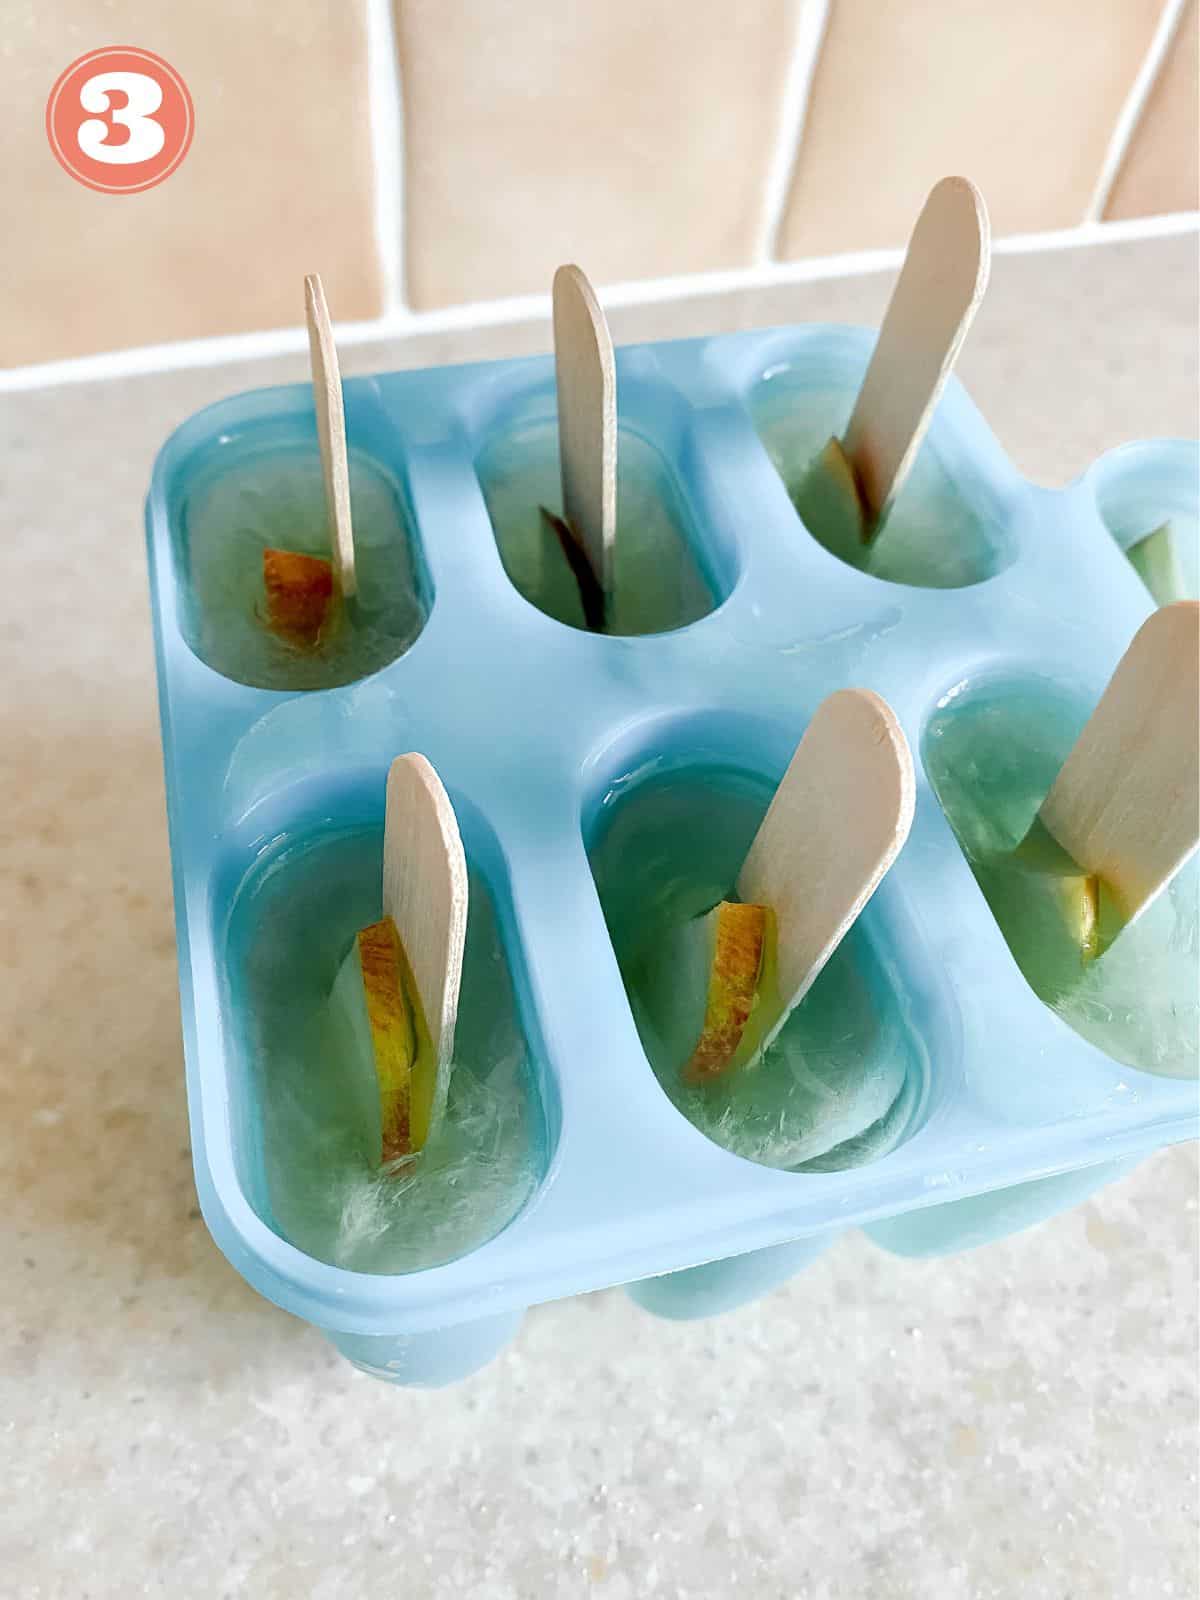 apple juice popsicles in a blue mold.